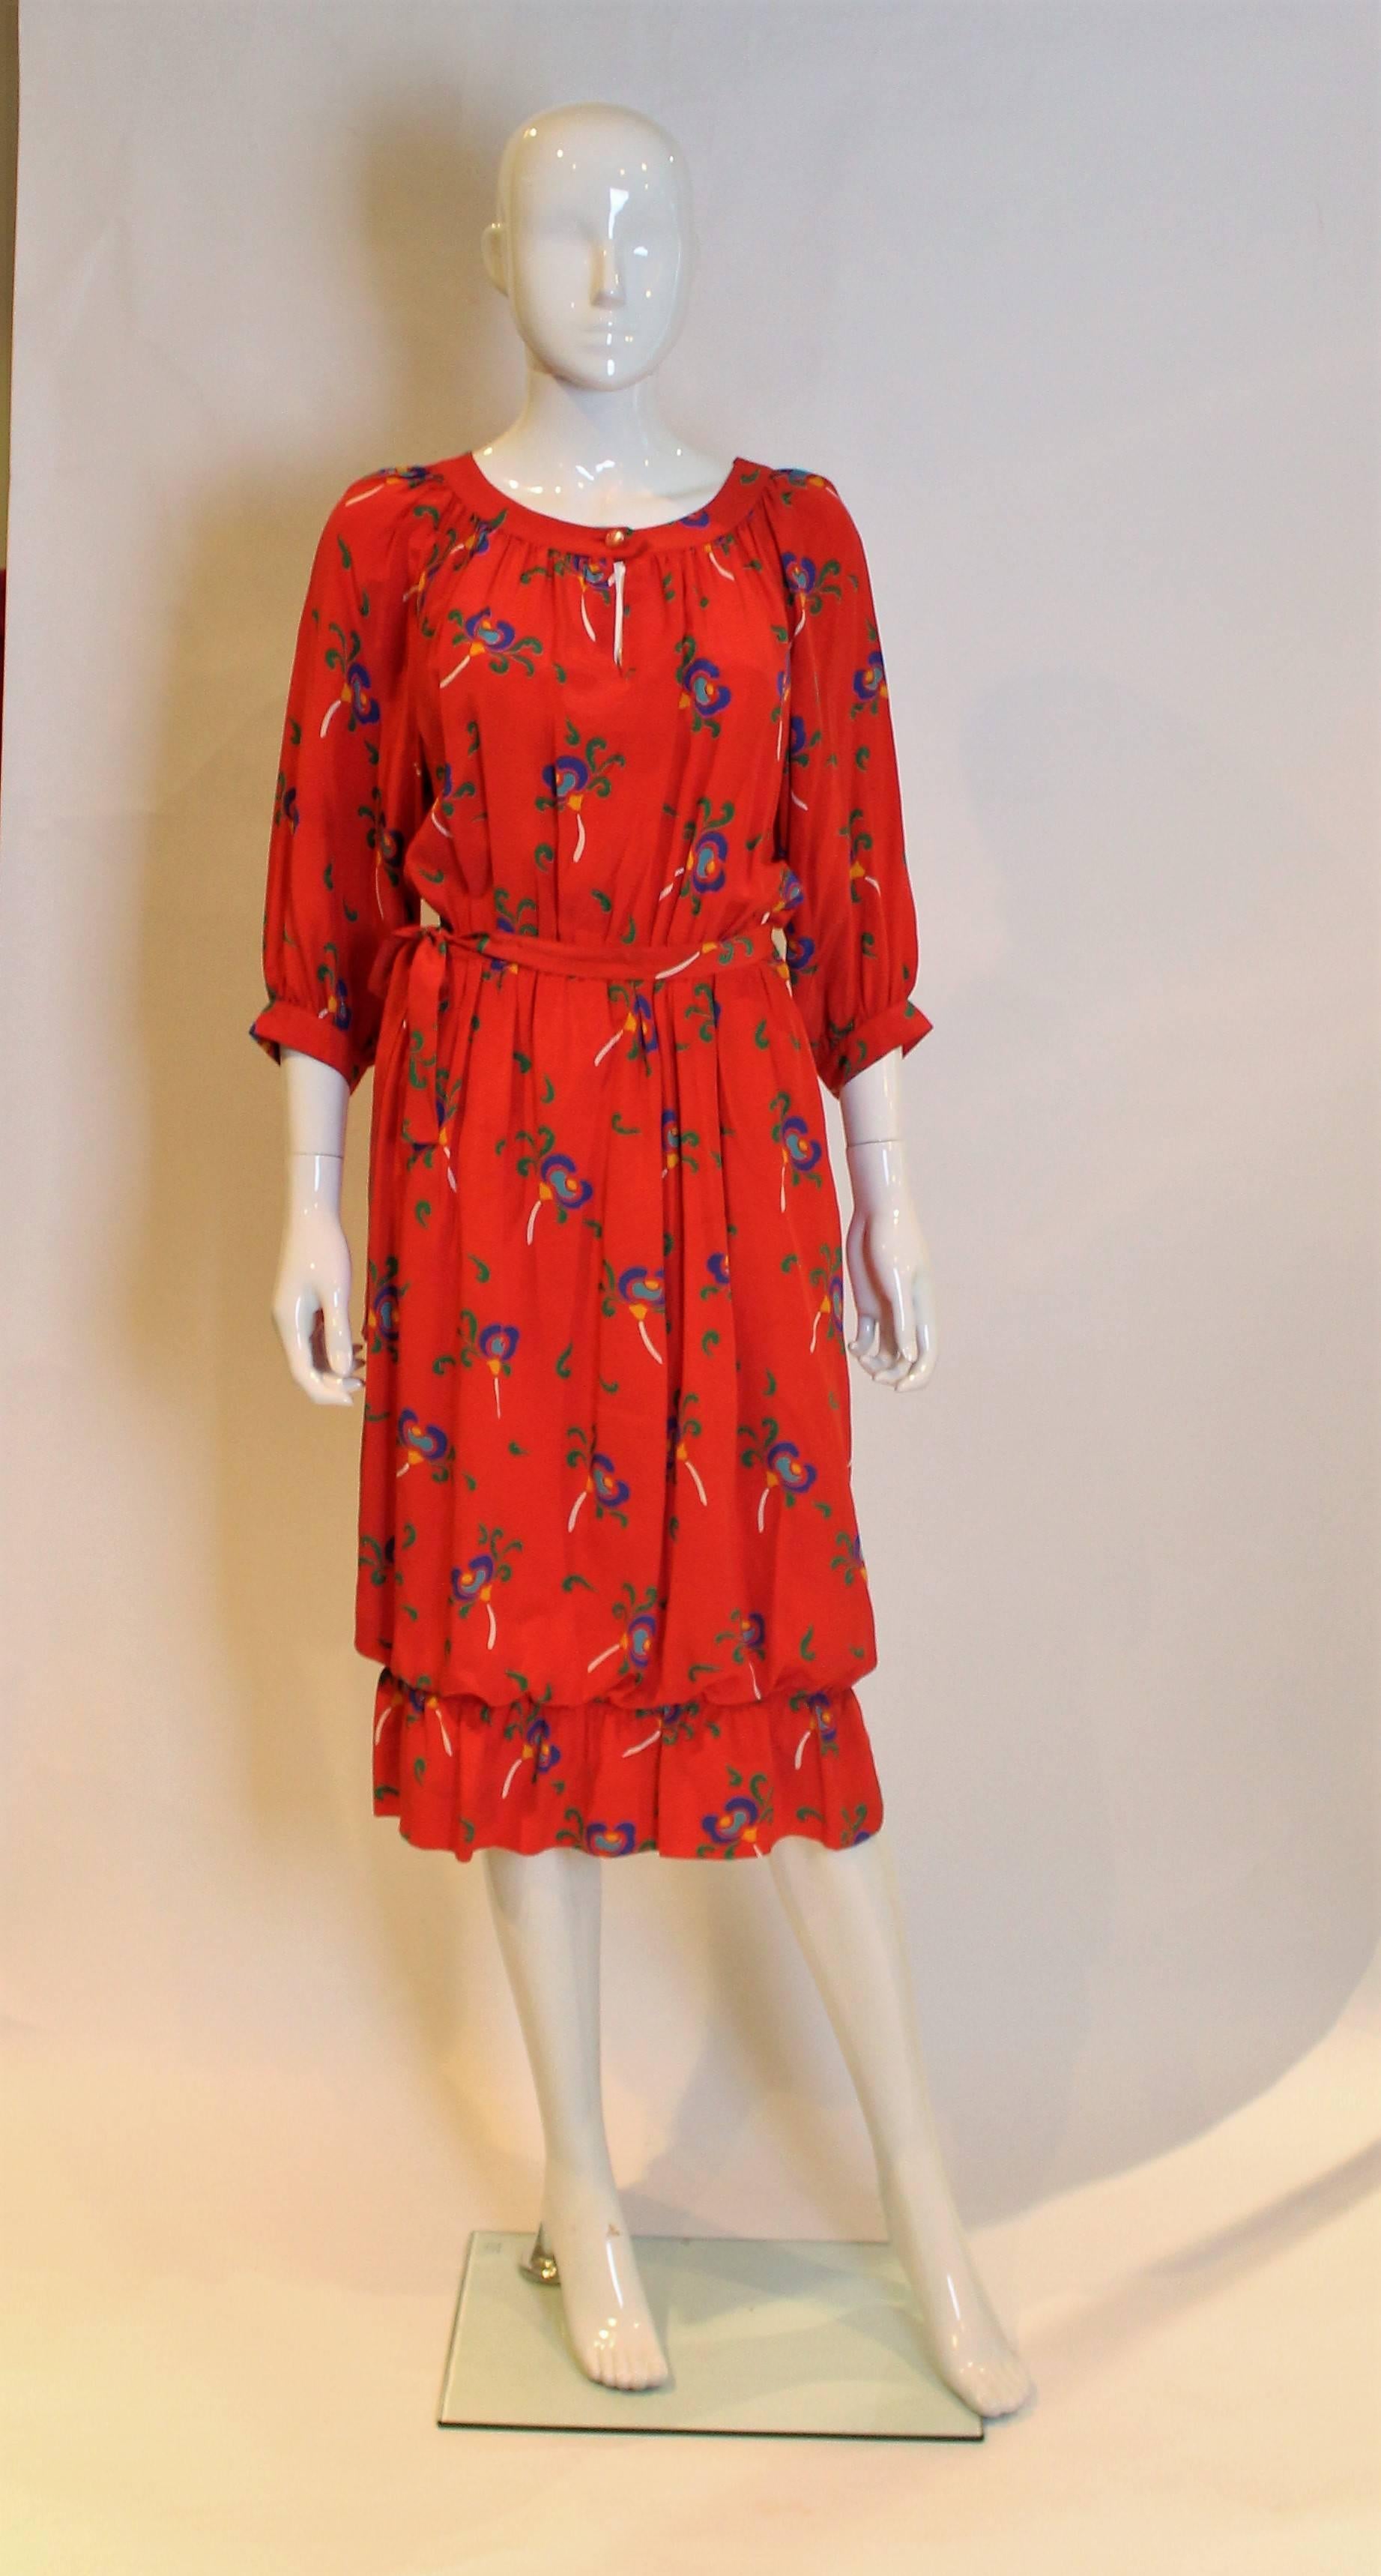 A chic silk dress by Celine.The dress has a red background with a floral print, and has a around neckline with gathering and one button opening.The dress has a side opening with poppers from the waist up and a zip opening below the waist.There is an